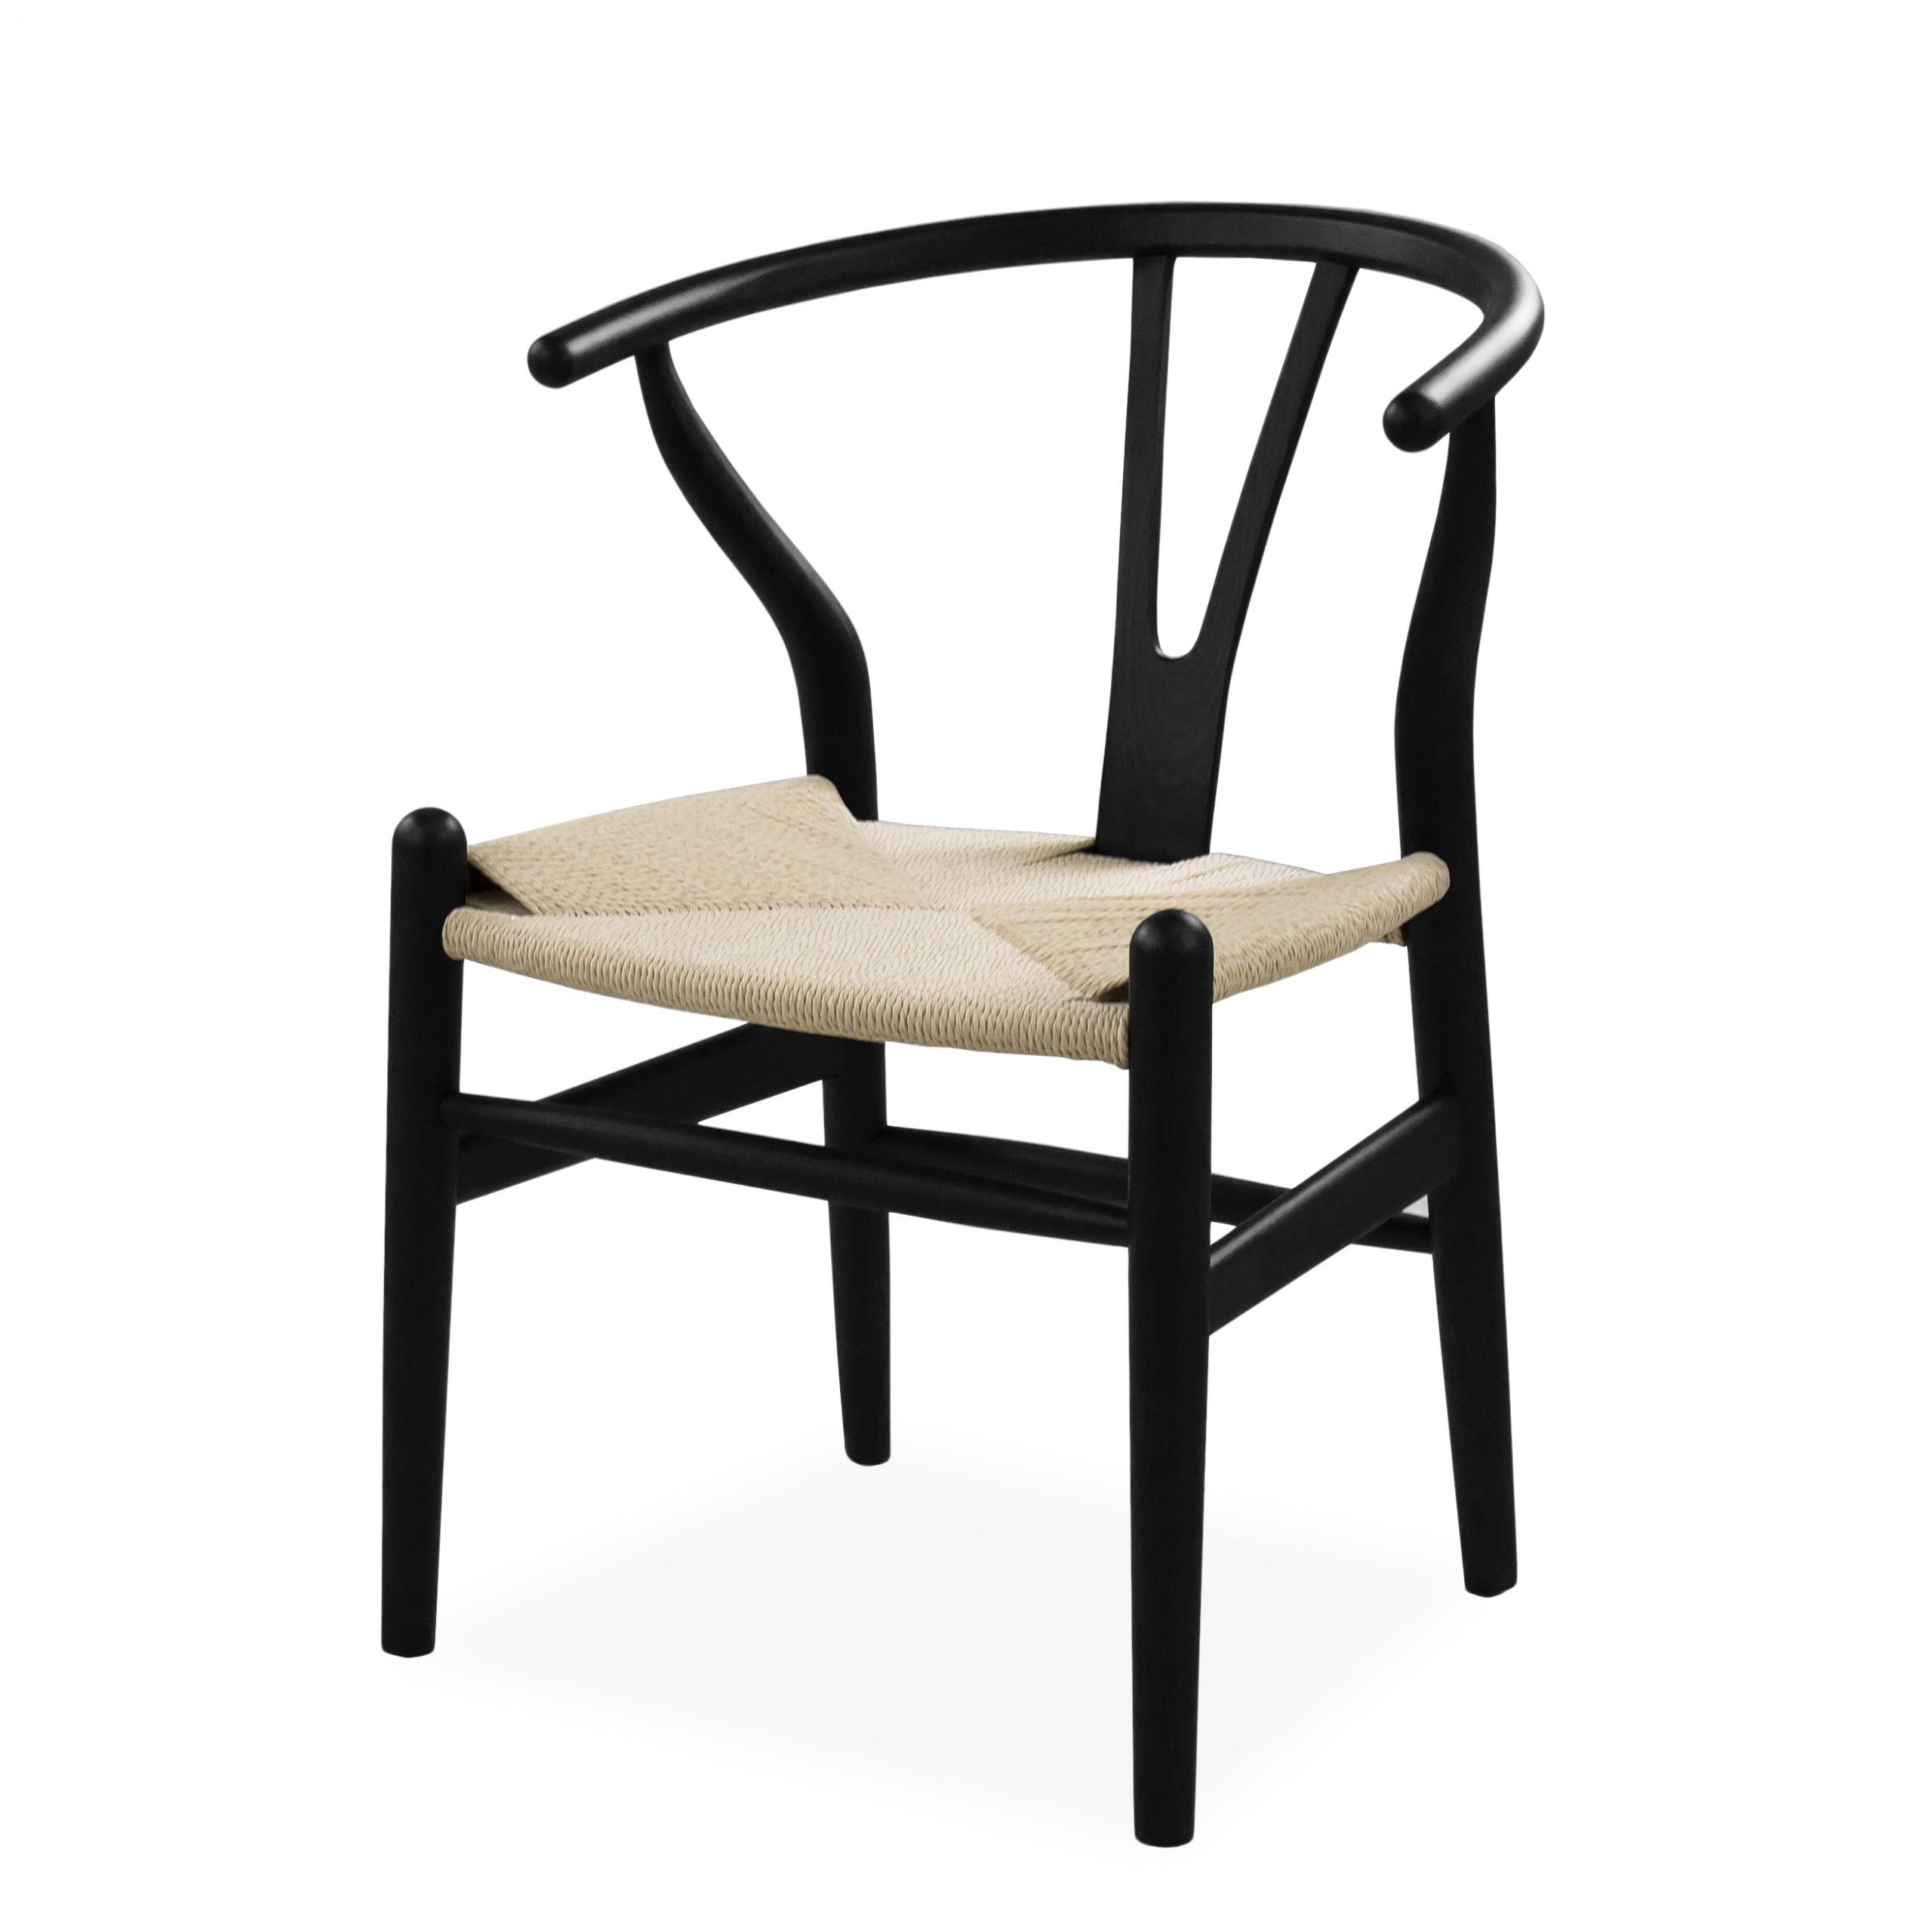 Mia Dining Chair - ScanDesigns Furniture